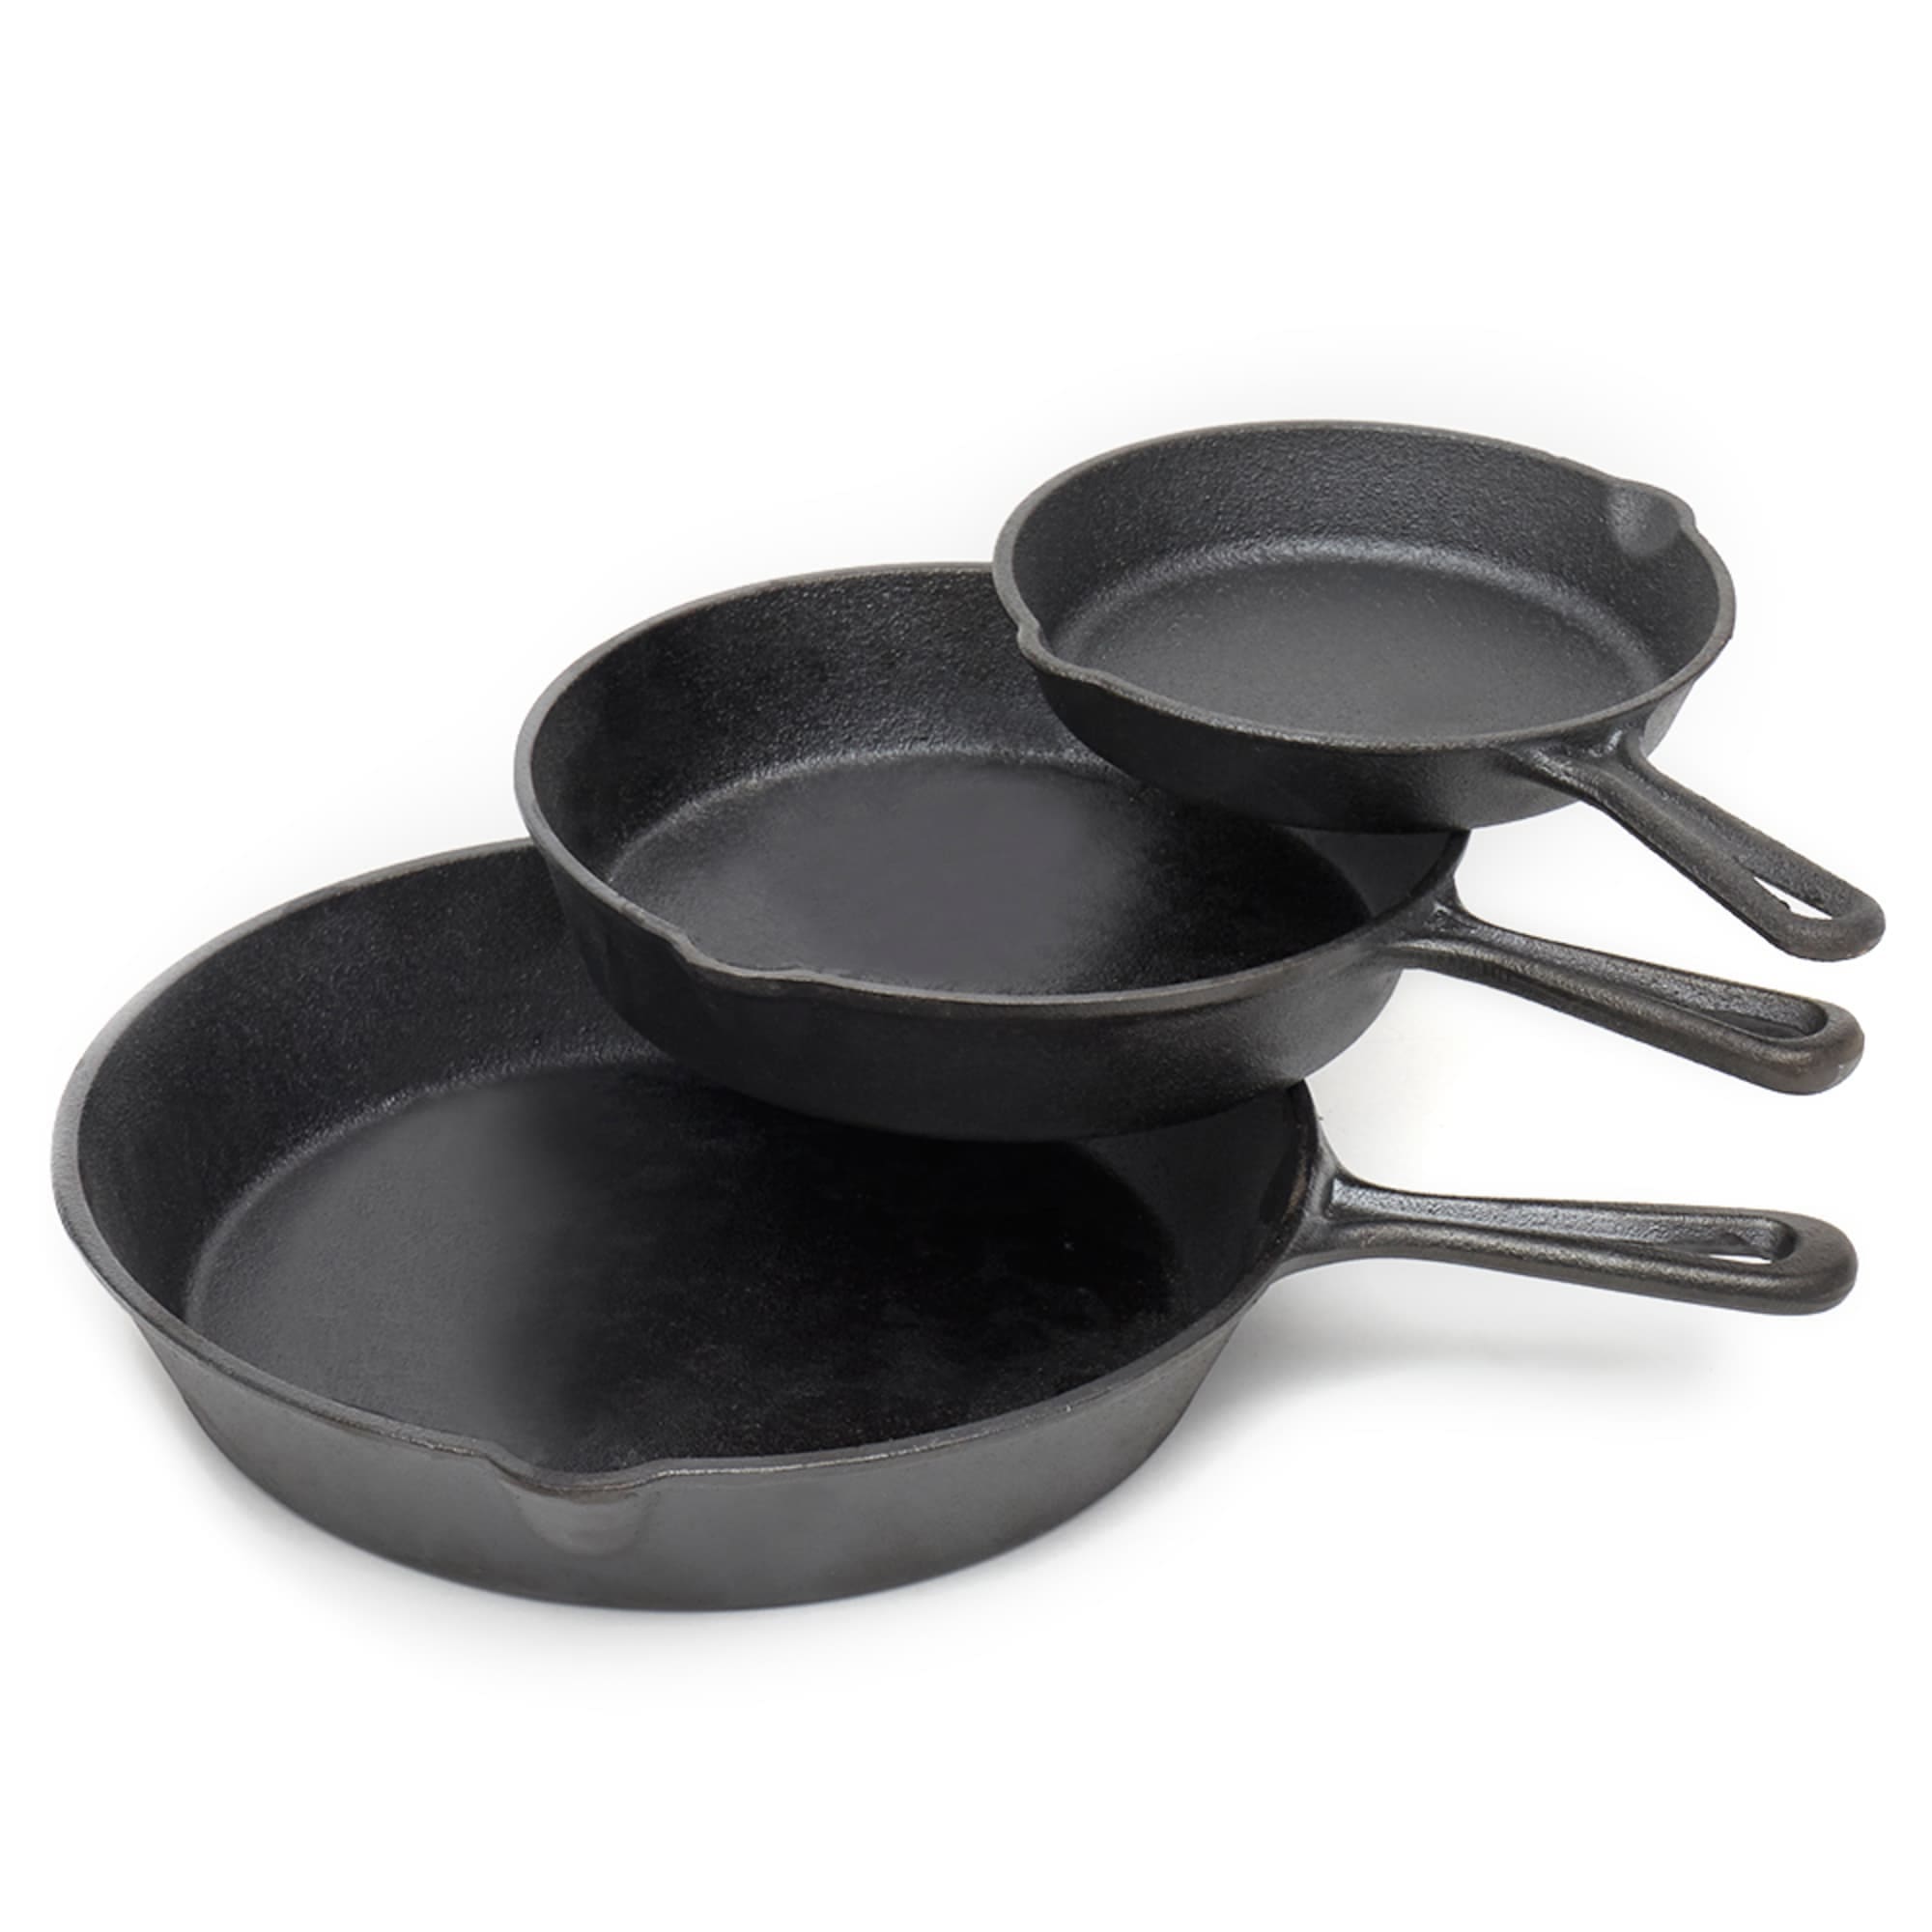 Home Basics 3 Piece Cast Iron Skillet Set Includes 6, 8, and